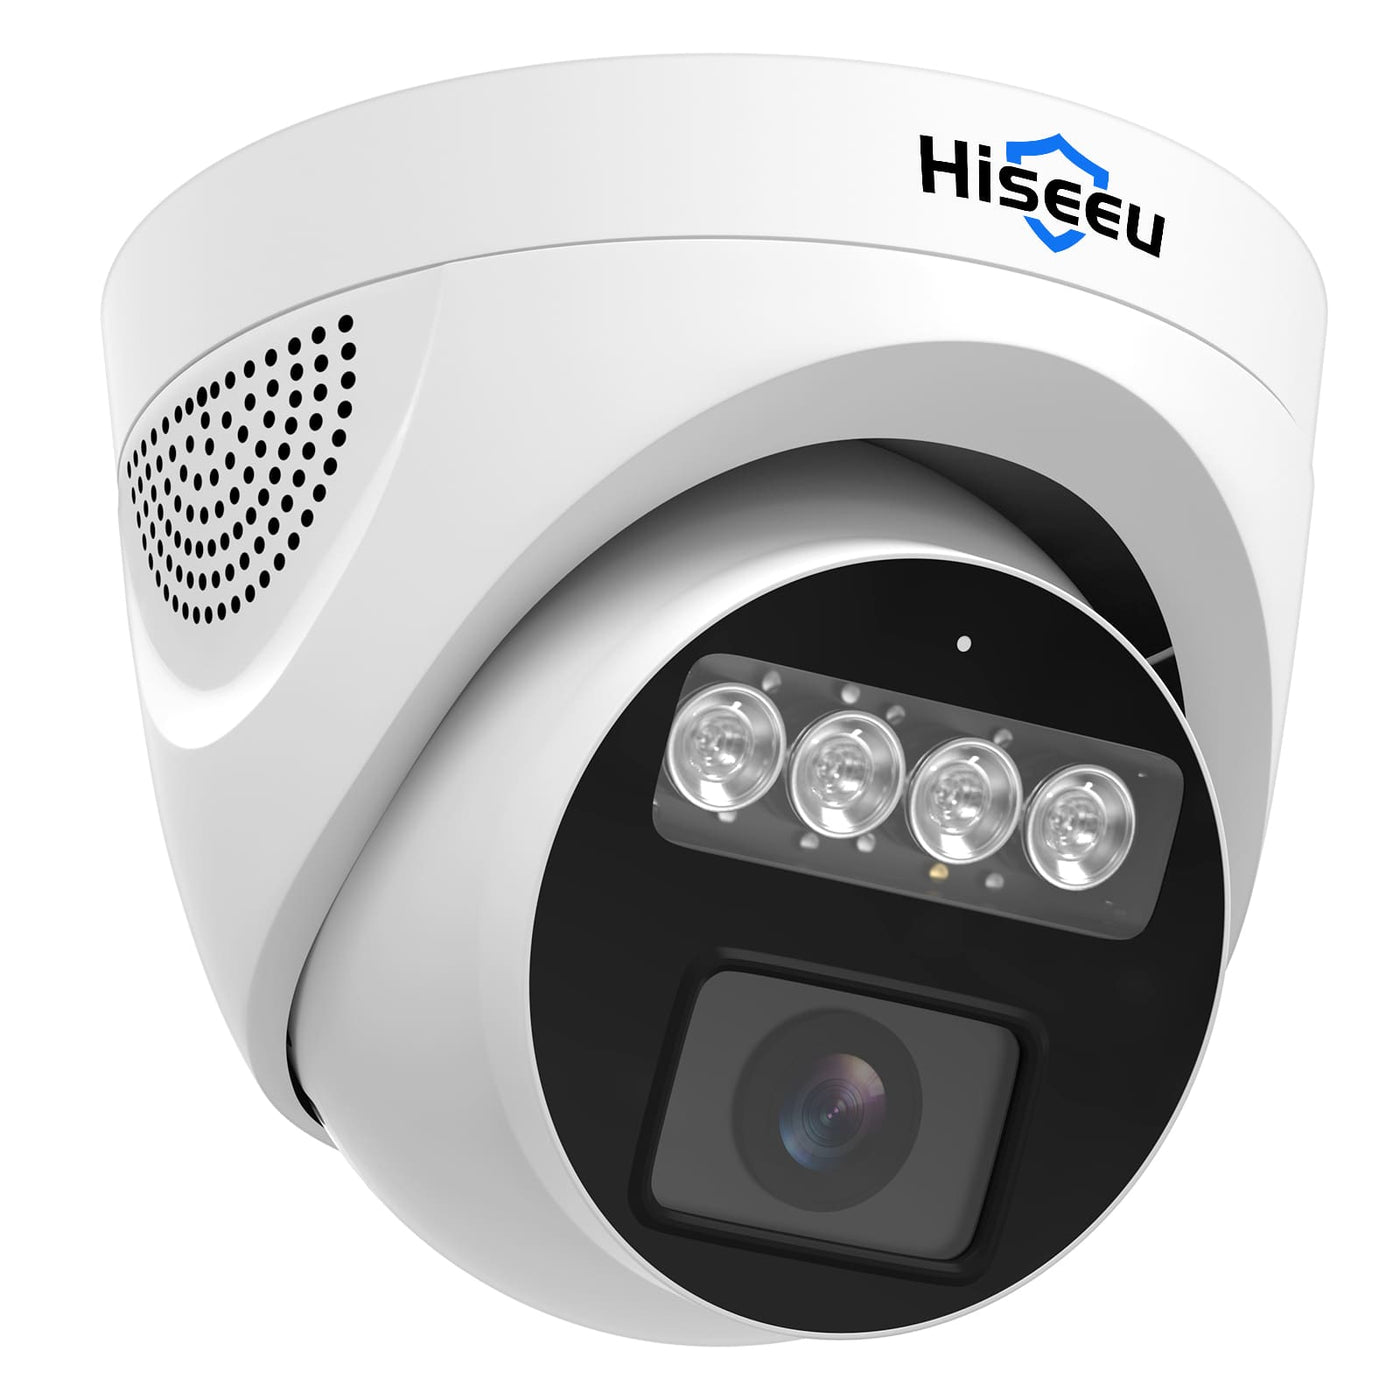 Hiseeu 5MP Analog/AHD/CVI/XVI 2560 TVL Wired Security Camera, Dome Comera for 5MP/1080P Analog Security Cameara system, Clear Night Vision up to 60ft, Remote Access Wall& Ceiling Mount